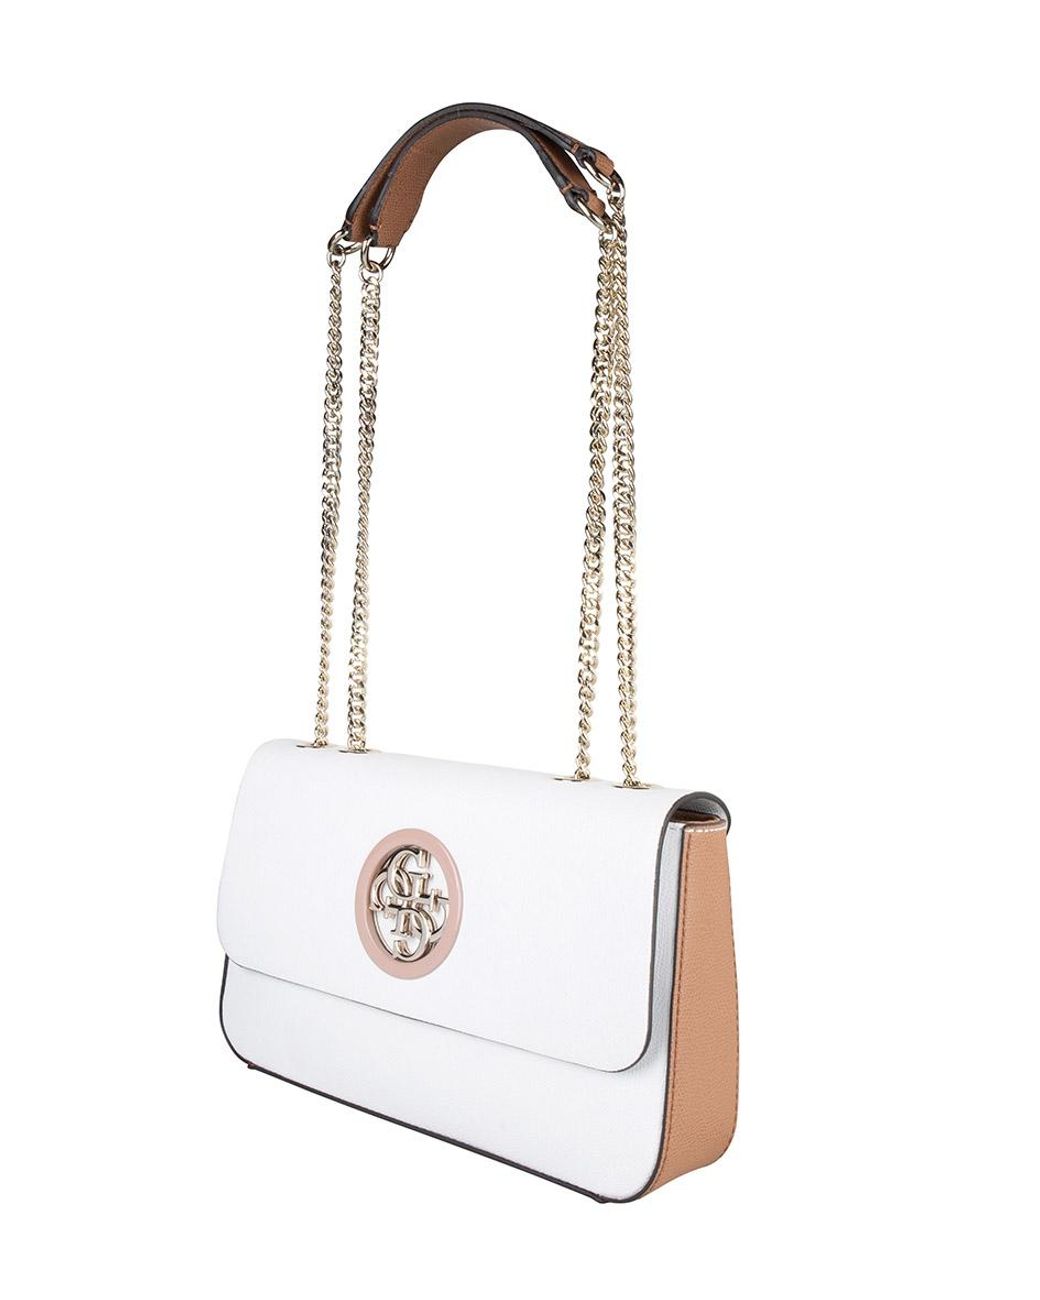 Guess Open Road Logo Crossbody Outlet, SAVE 59% - aveclumiere.com